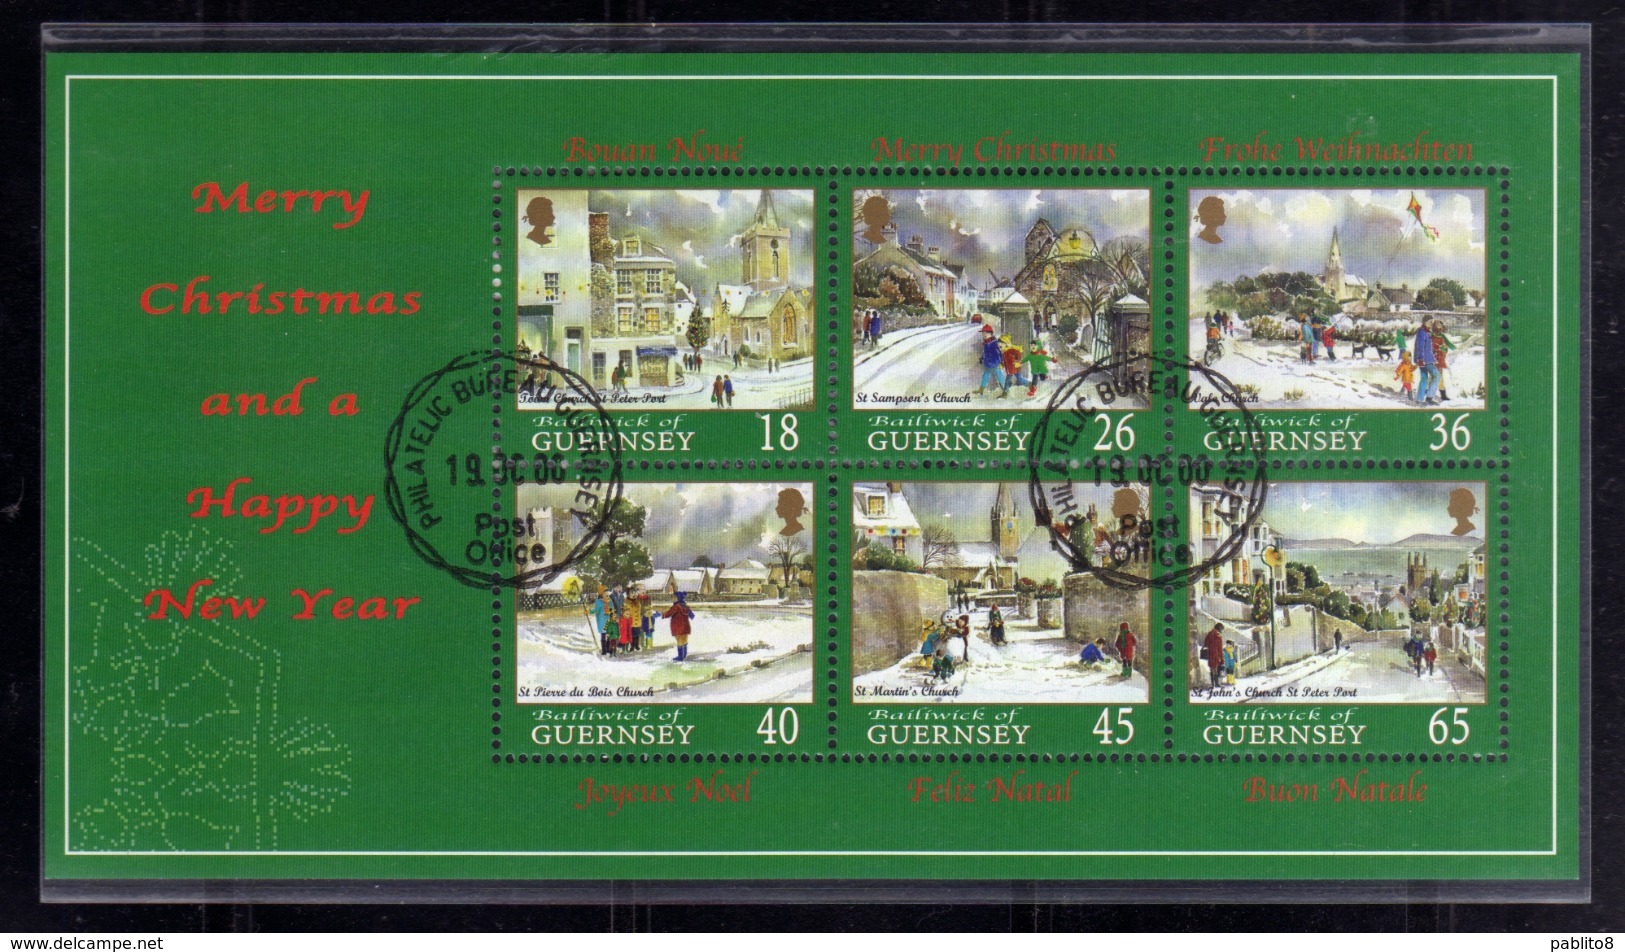 GUERNSEY GUERNESEY 2000 MERRY CHRISTMAS AND HAPPY NEW YEAR BLOCK SHEET BLOCCO FOGLIETTO FDC FIRST DAY SPECIAL CANCEL - Guernesey